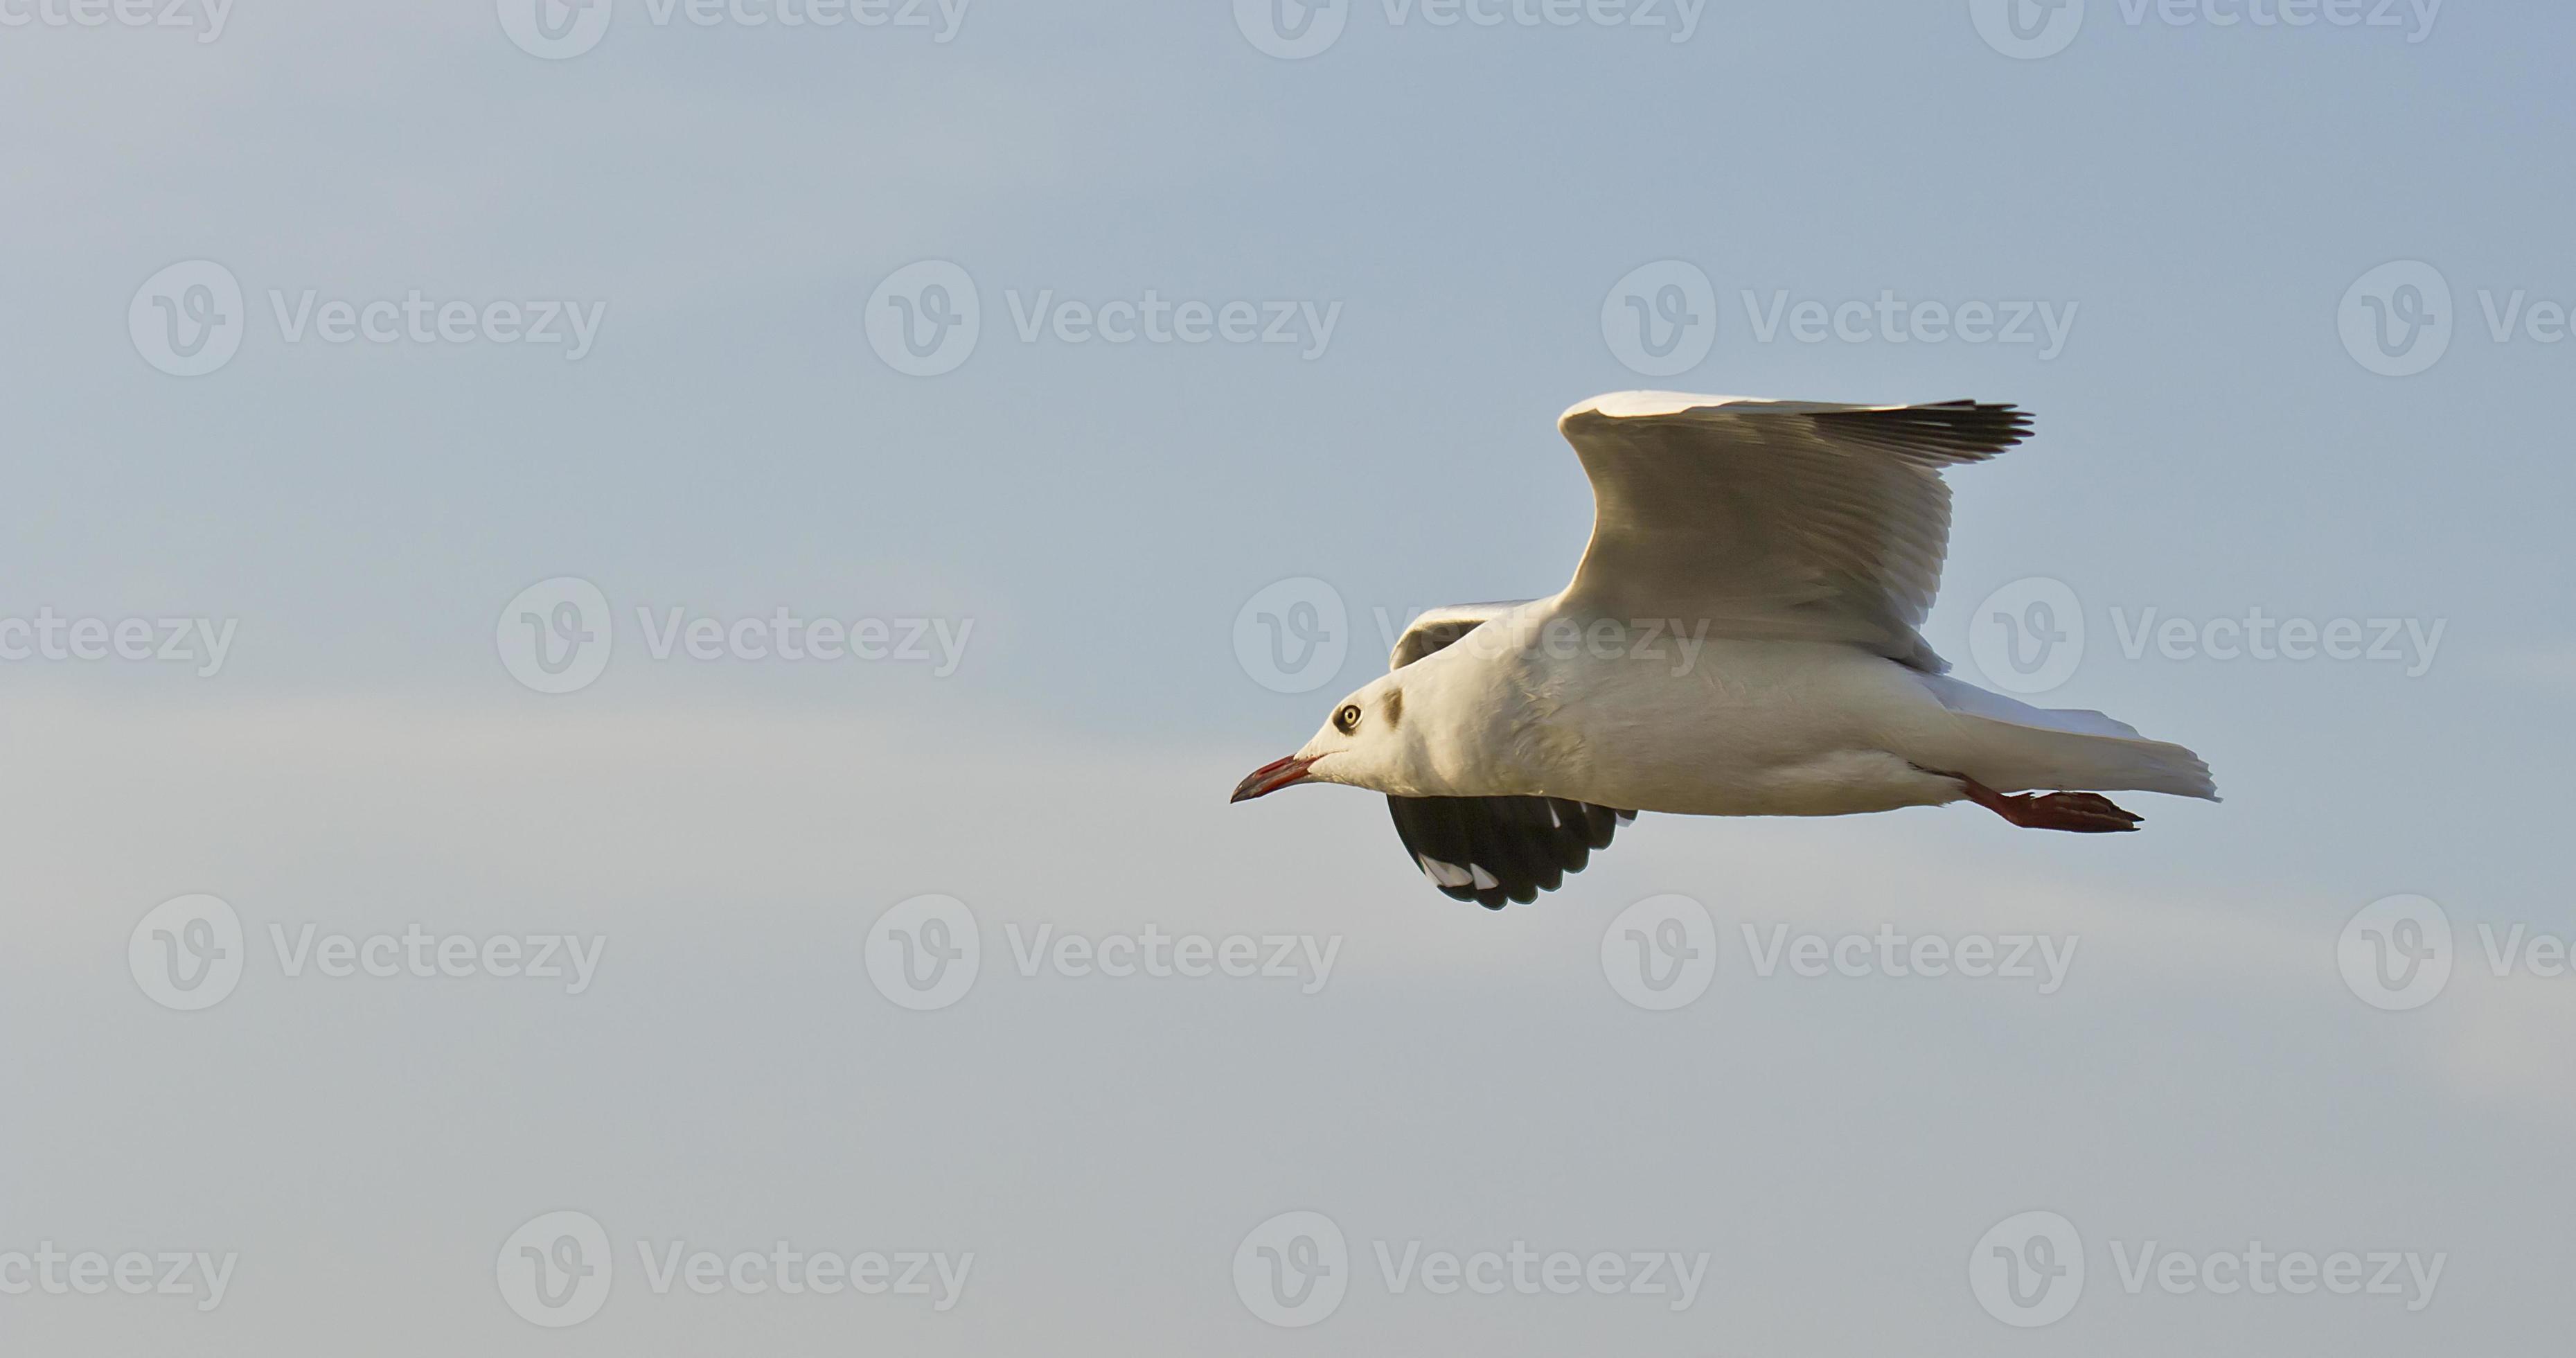 Seagulls are flying photo